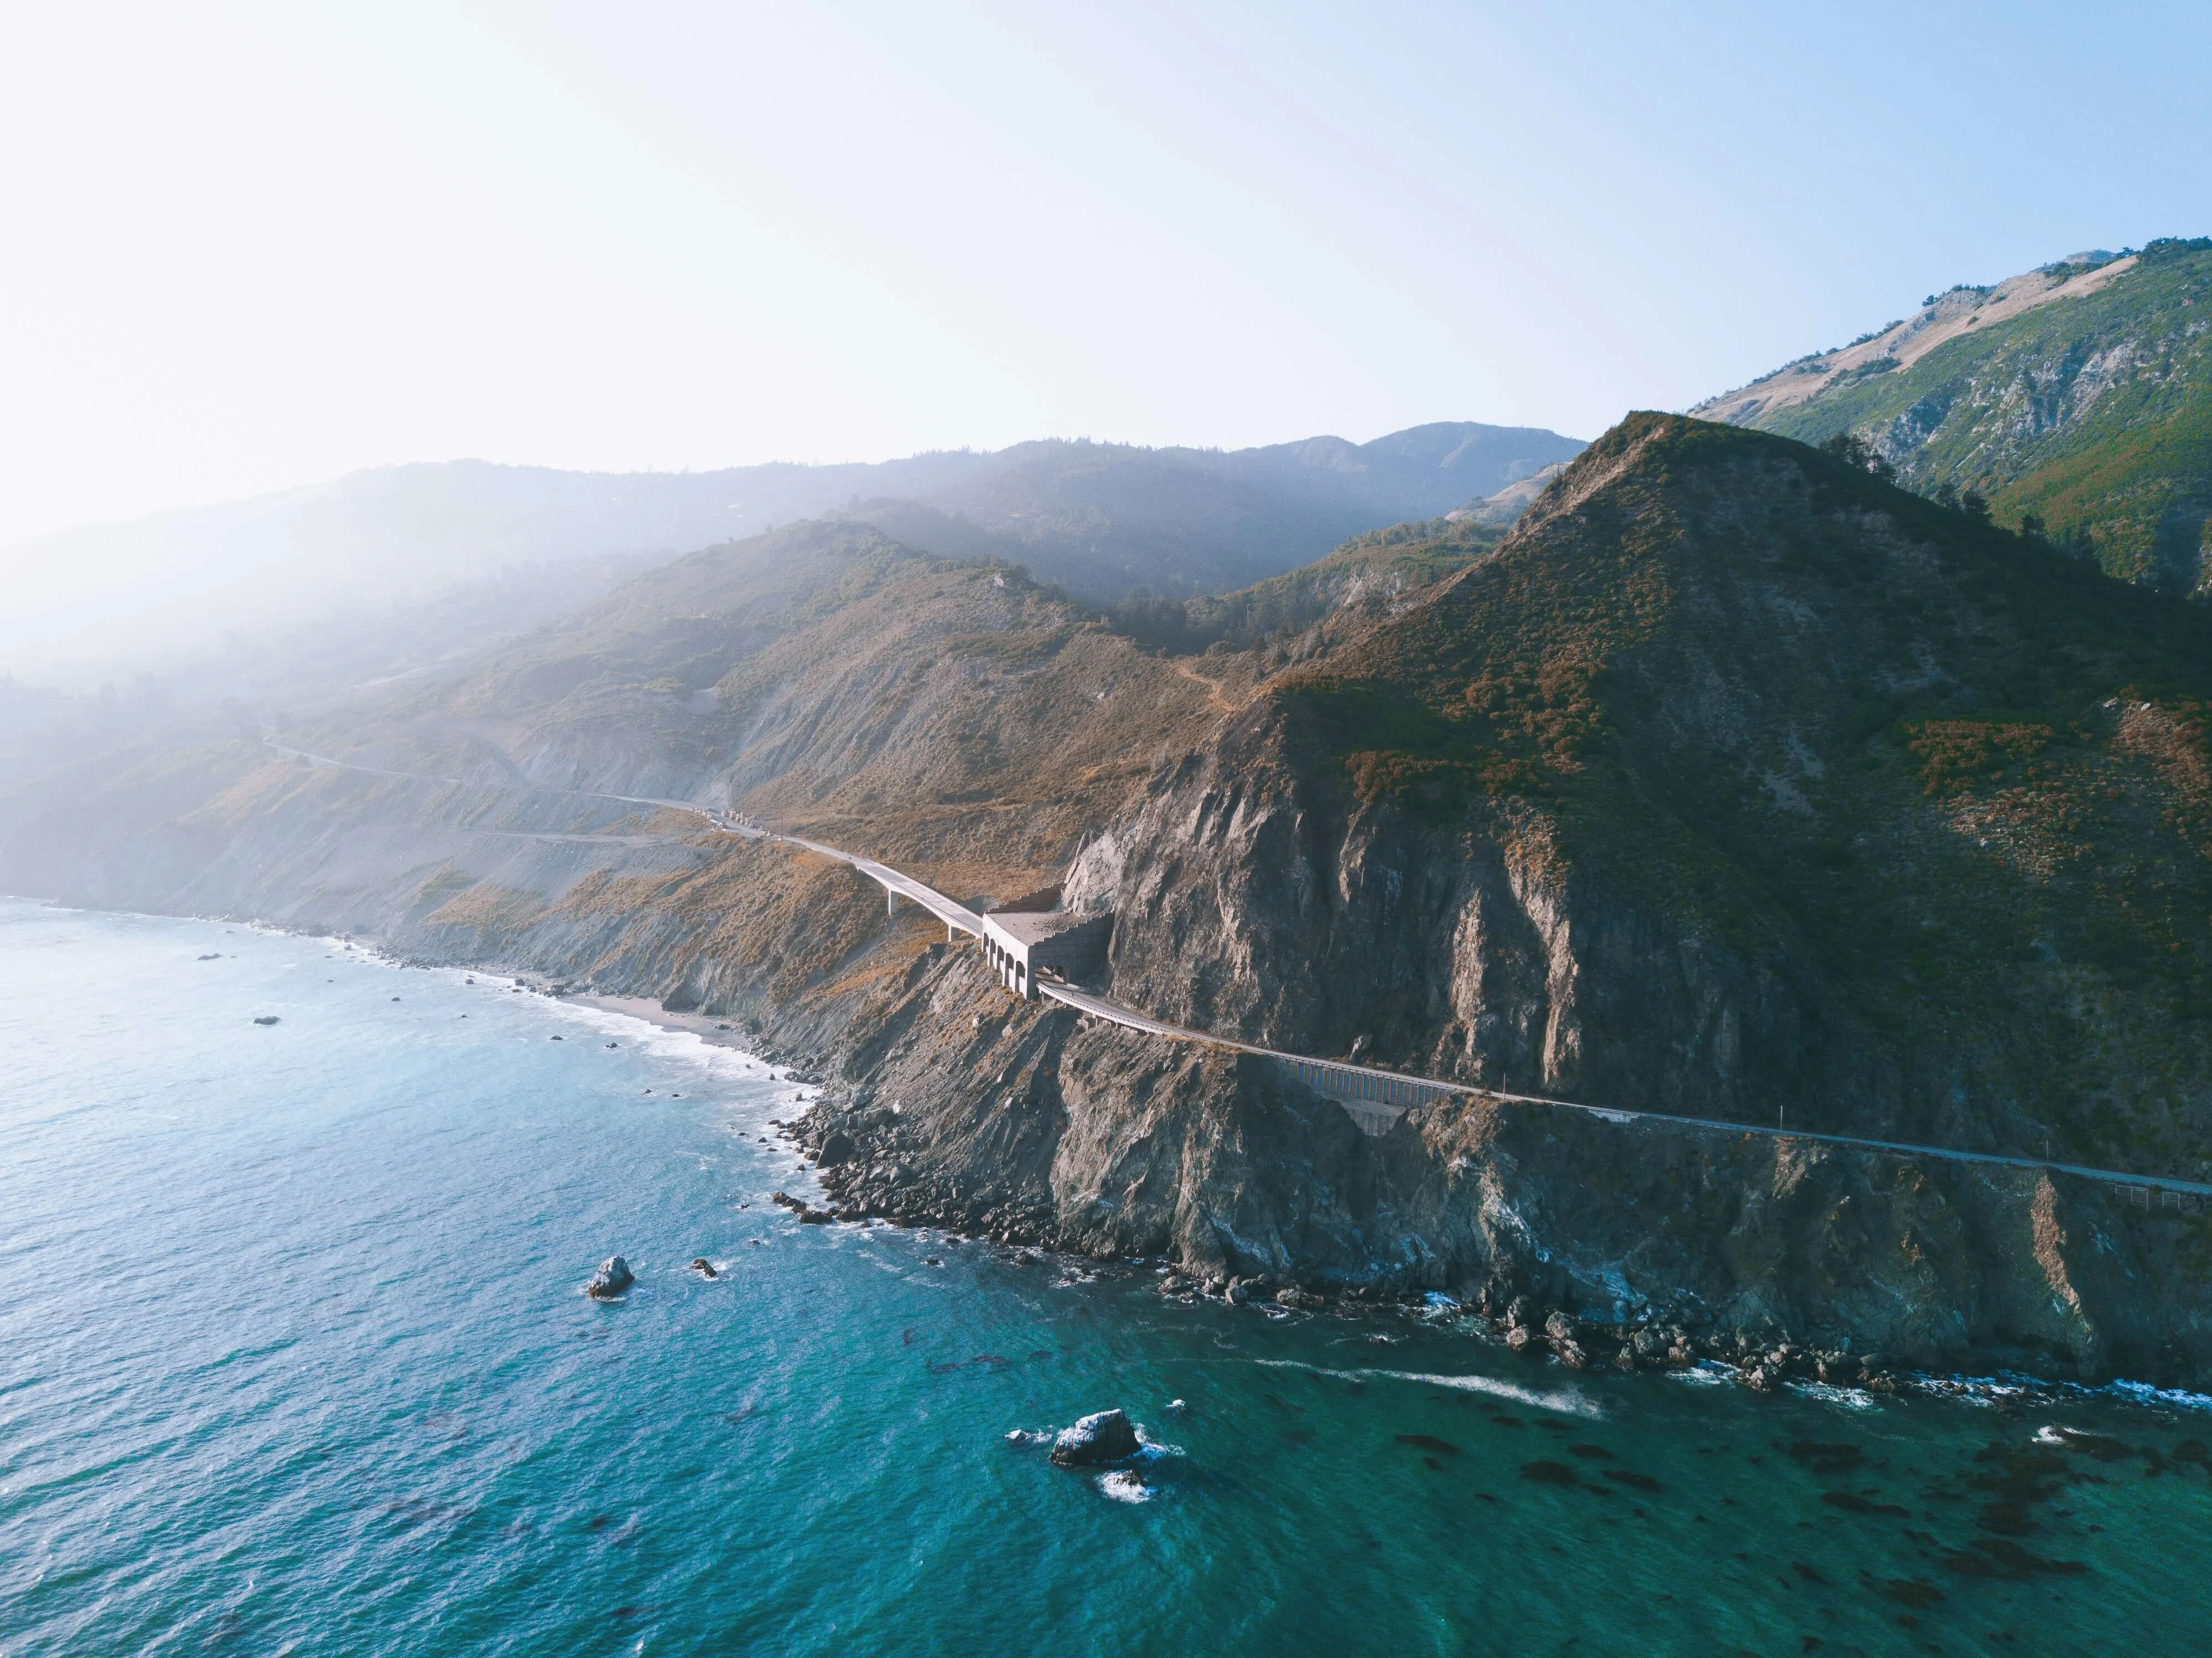 View of the Big Sur in California